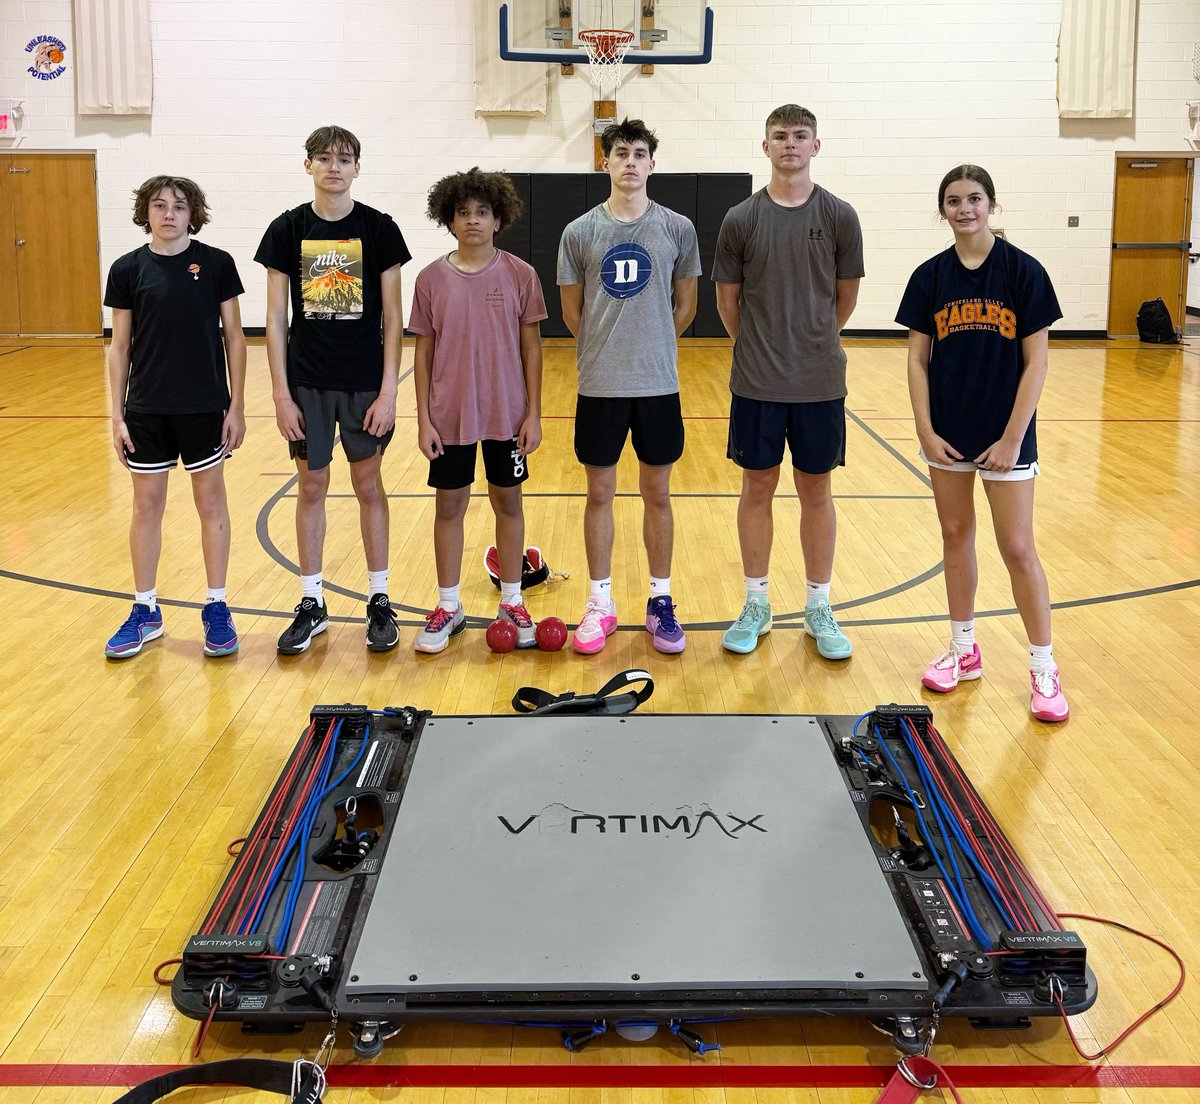 These Vertimax sessions are not for the faint of heart. We always say, “The bands don’t lie!” Are you working them or are they working you?!? This crew has been phenomenal through the first two weeks of our Vertimax Program!